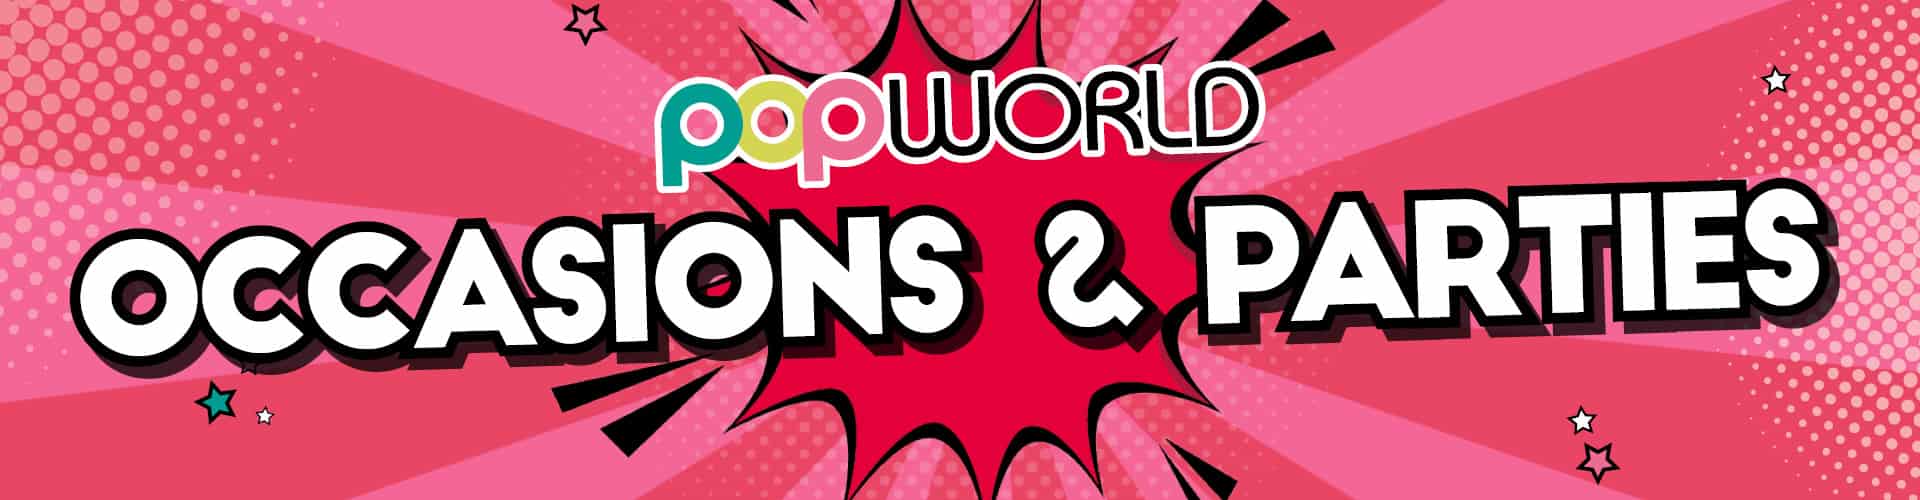 Occasions and Parties at Popworld Nottingham